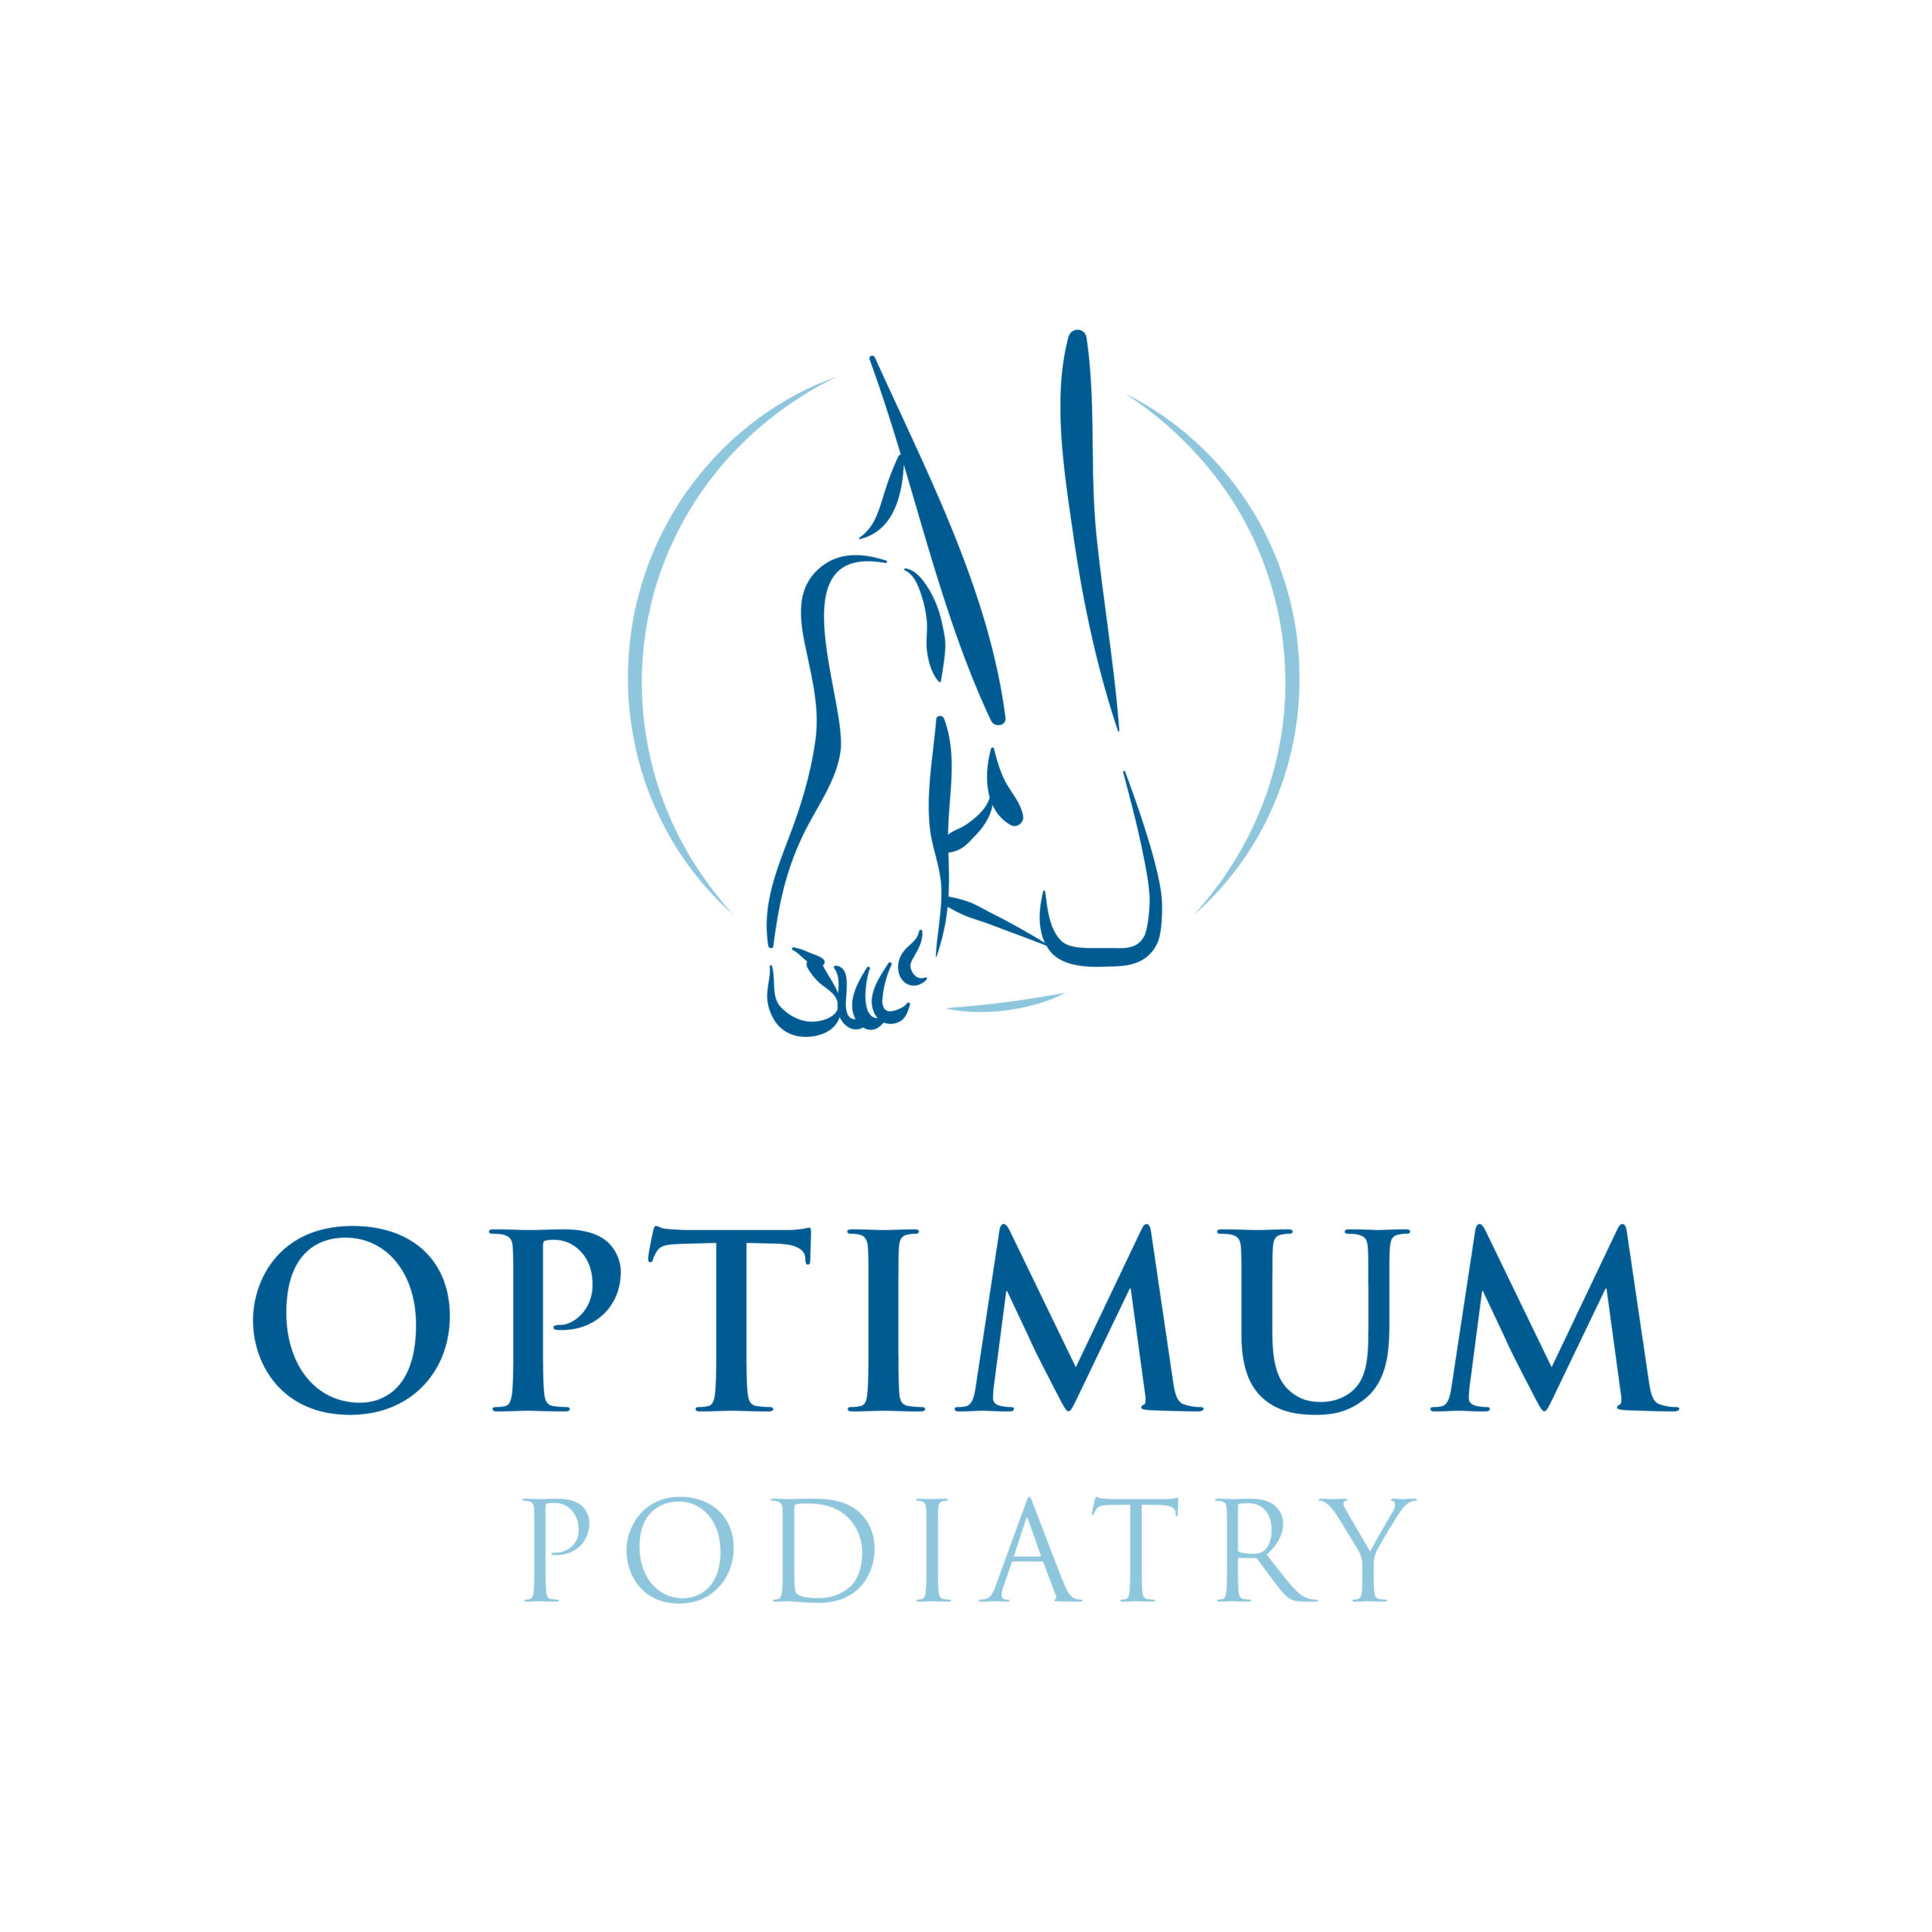 Custom logo design for Optimum Podiatry with the outline of feet within a circle